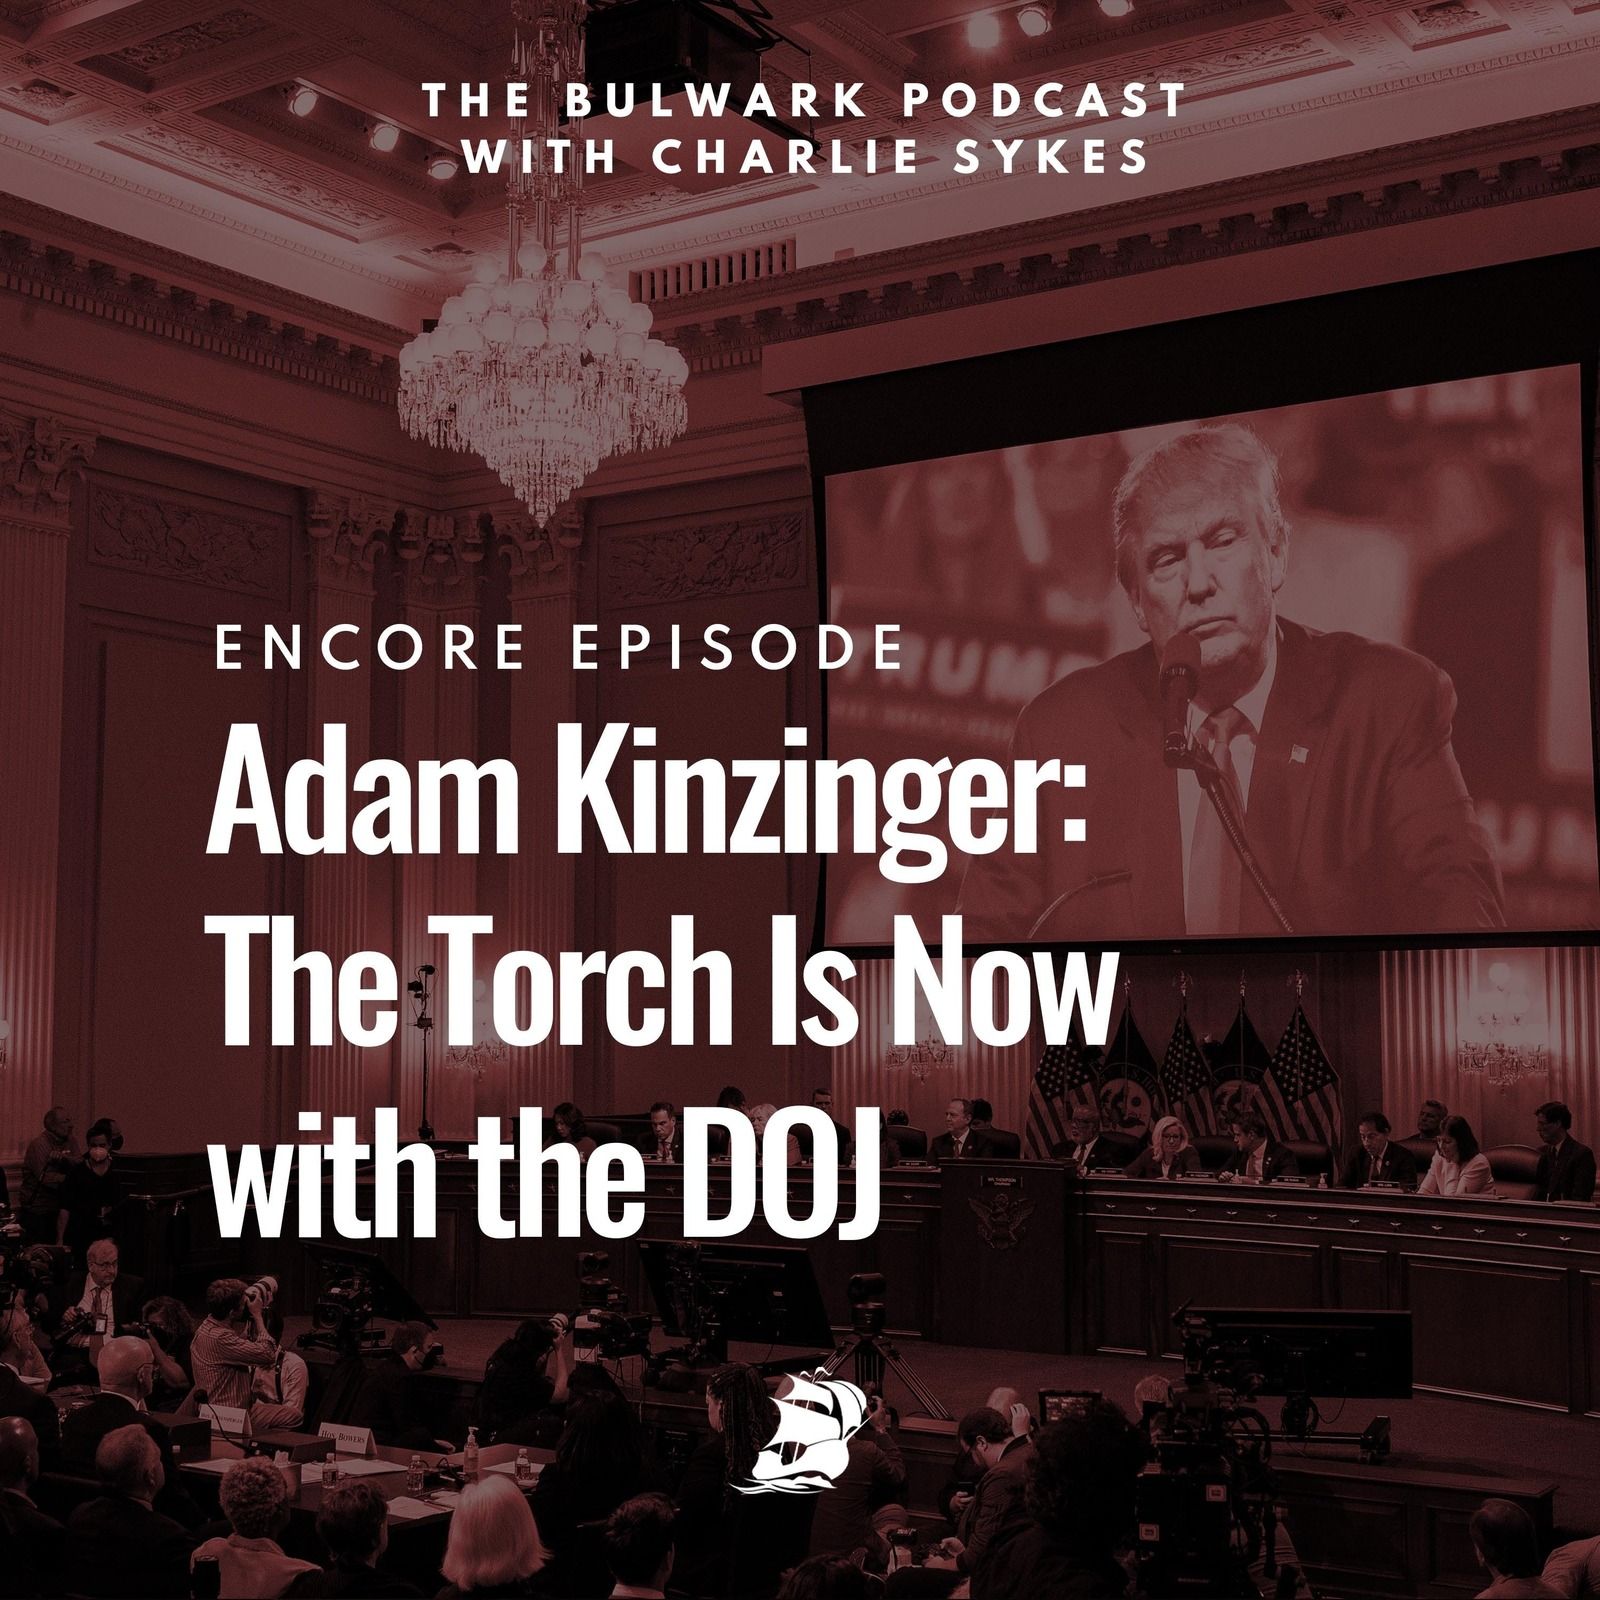 Adam Kinzinger: The Torch Is Now with the DOJ (Encore Episode)